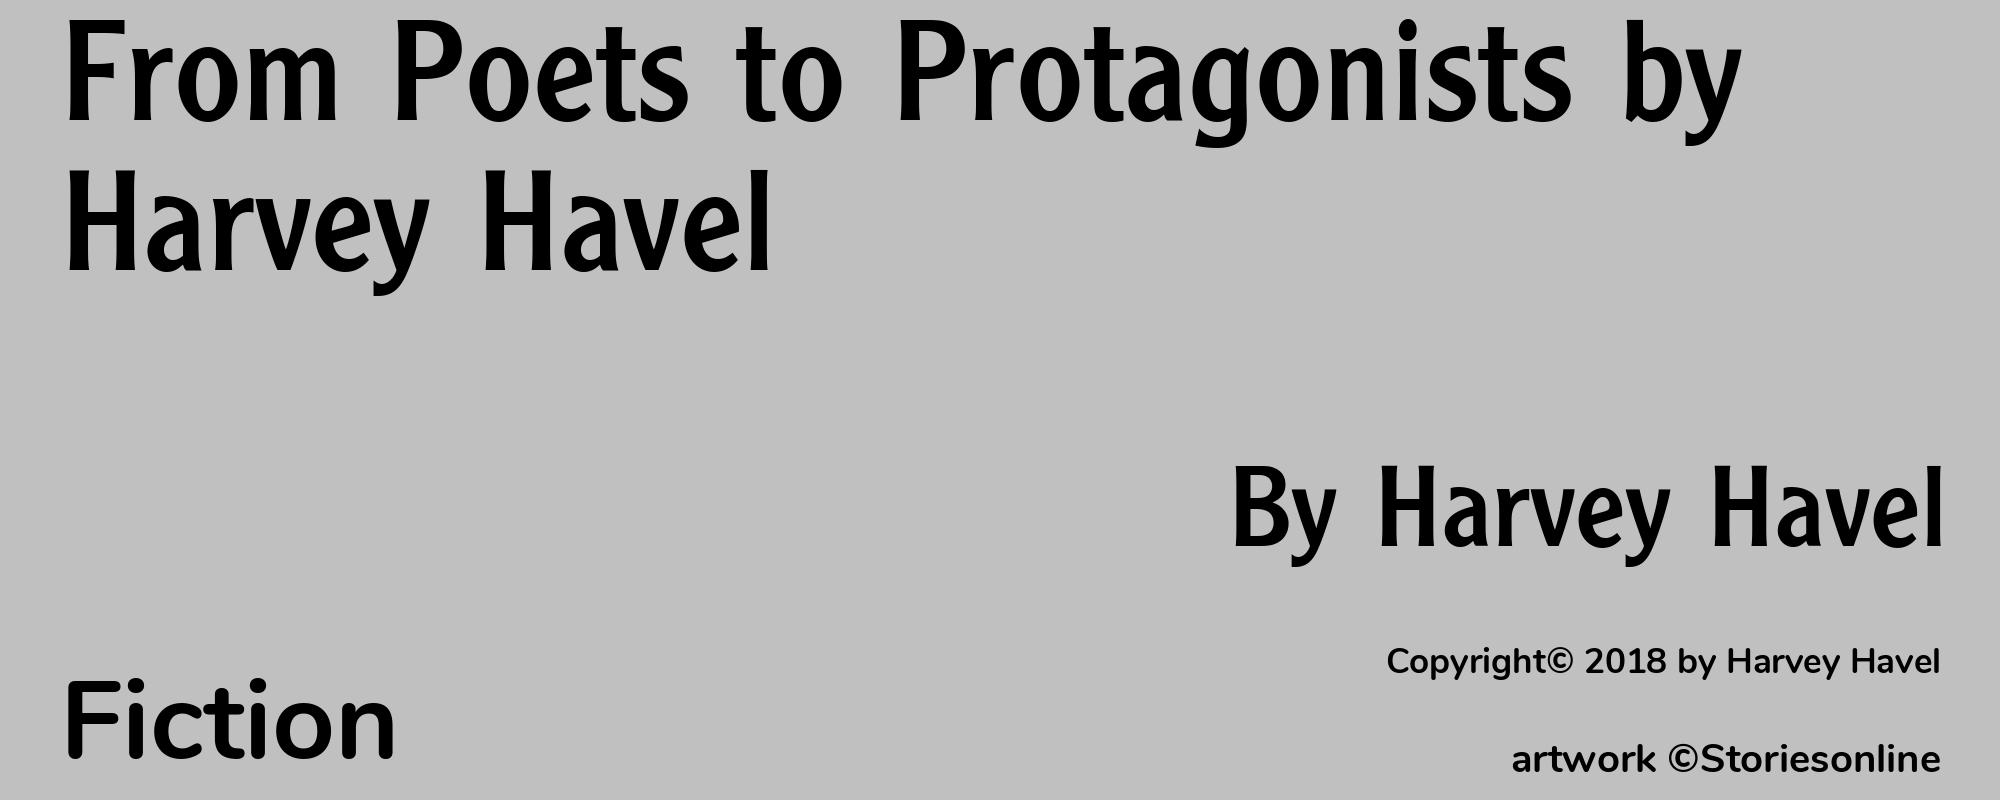 From Poets to Protagonists by Harvey Havel - Cover